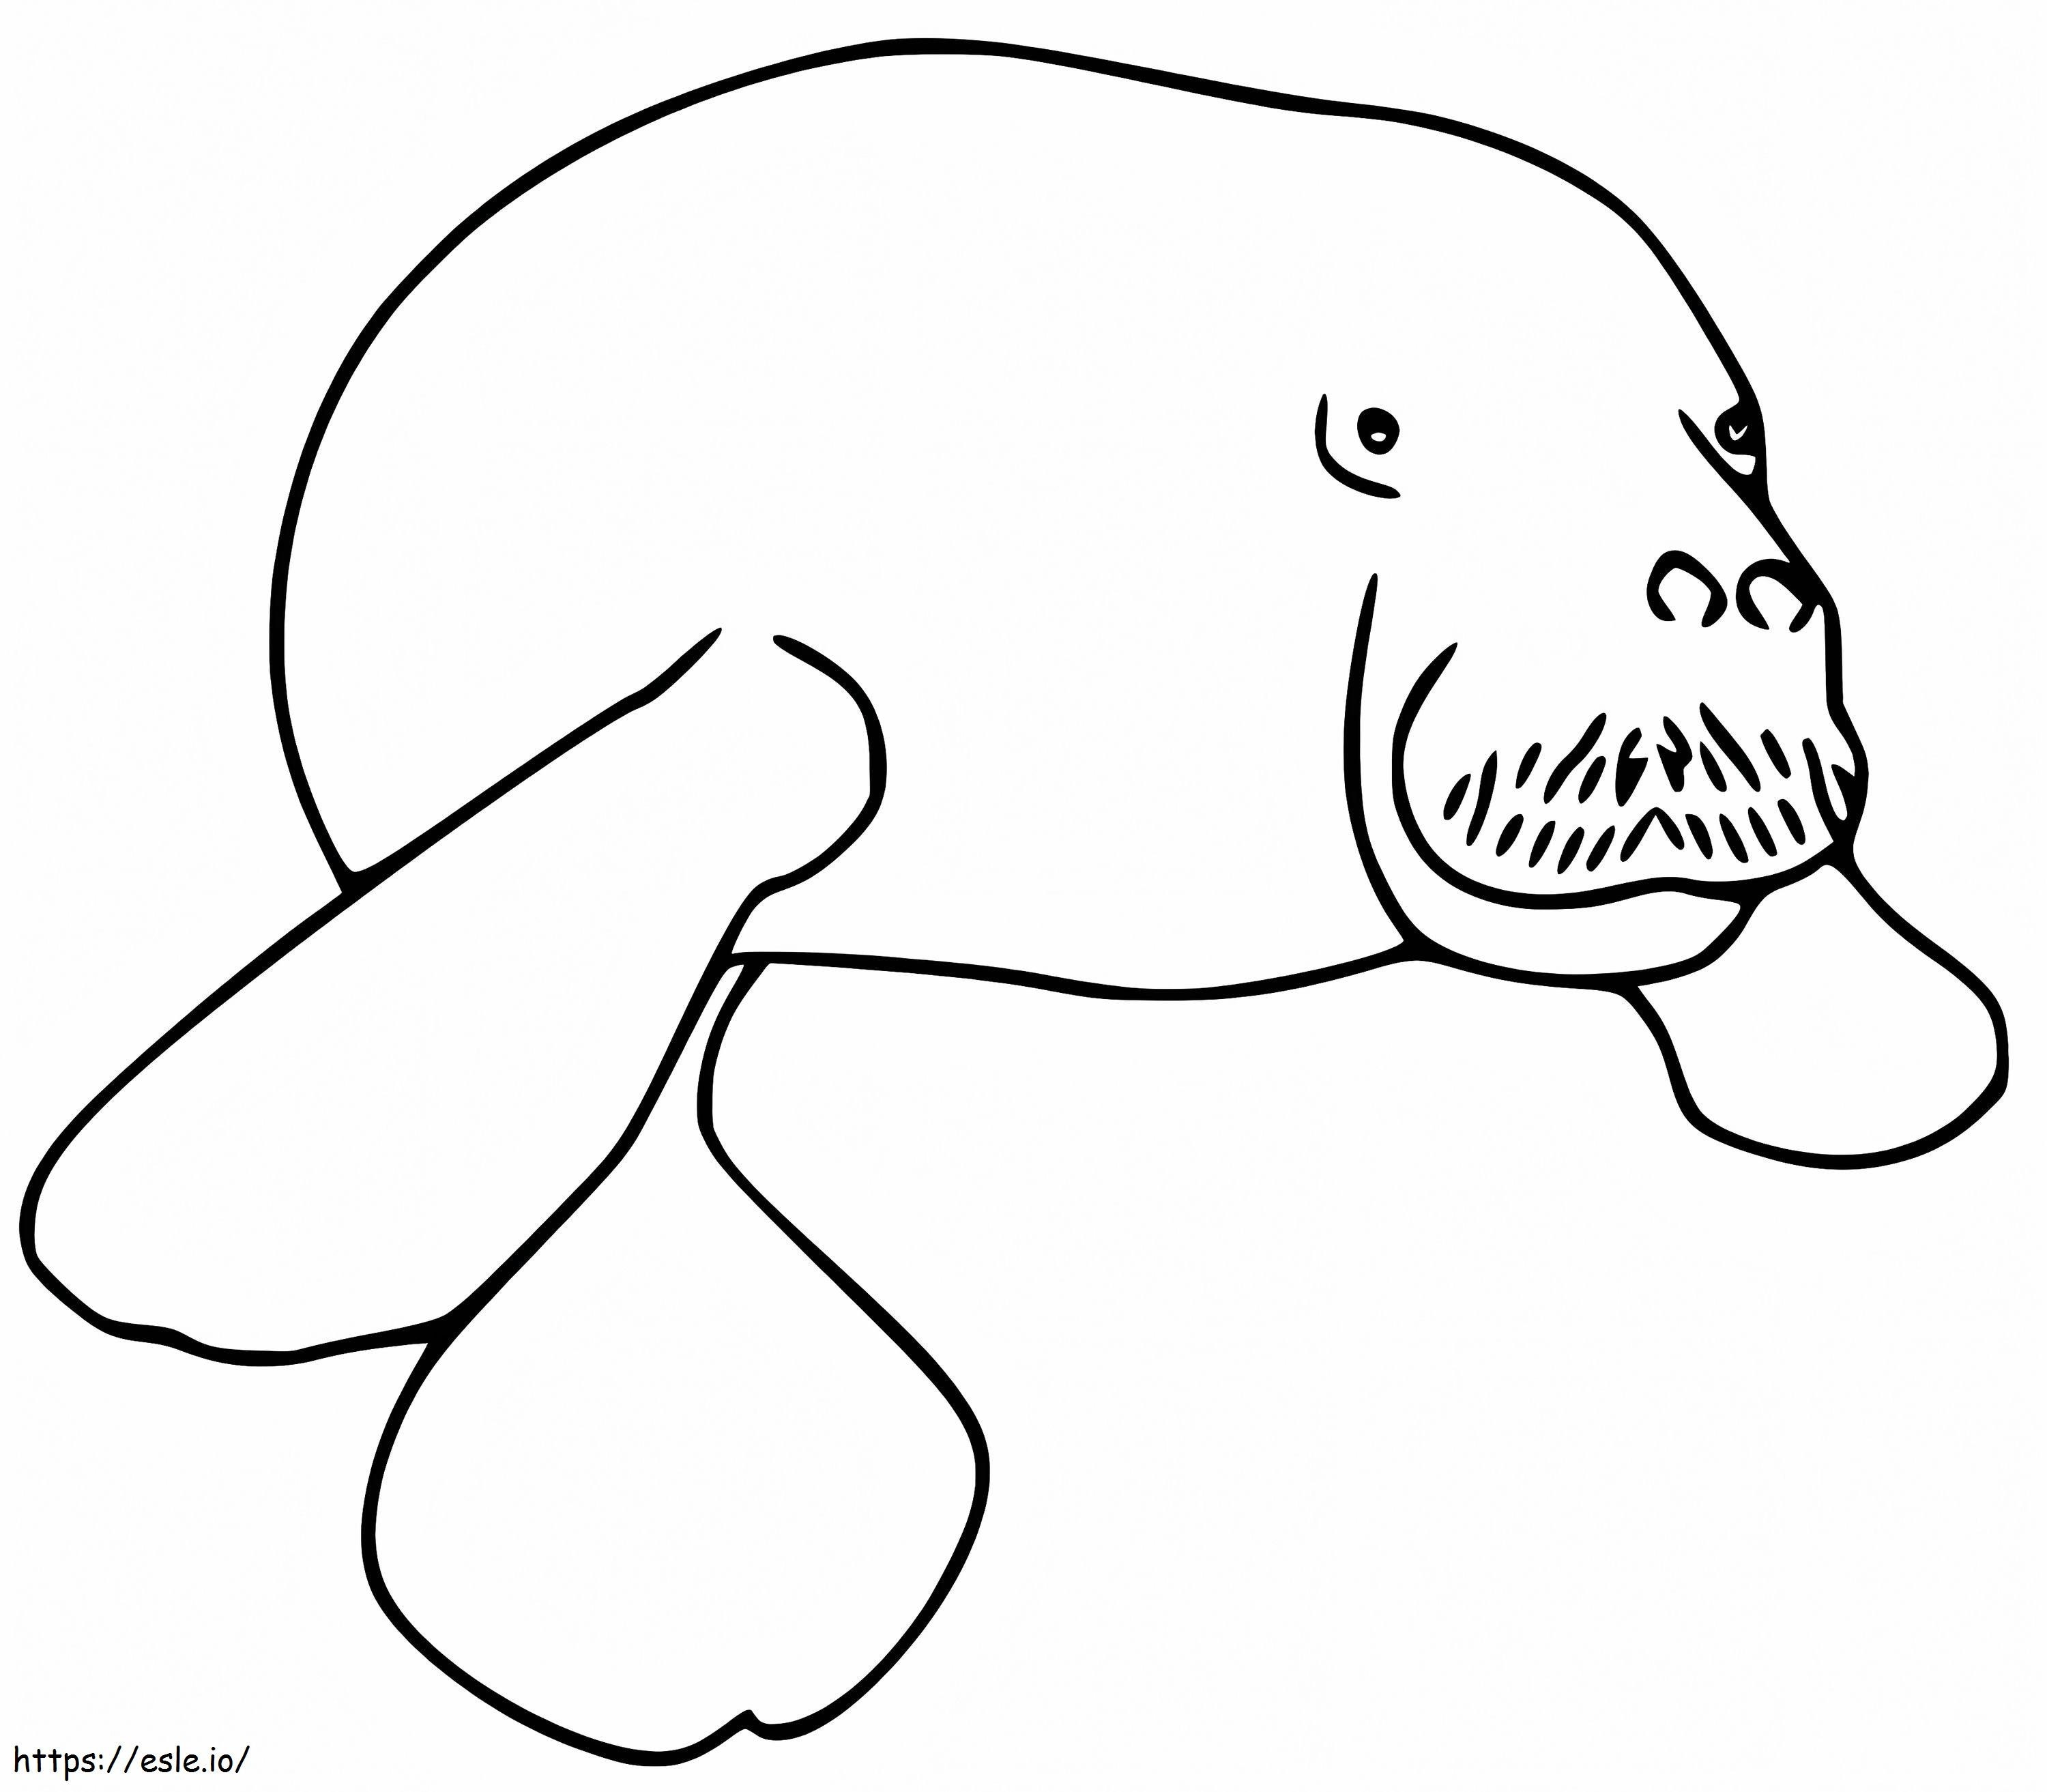 Manatee 1 coloring page